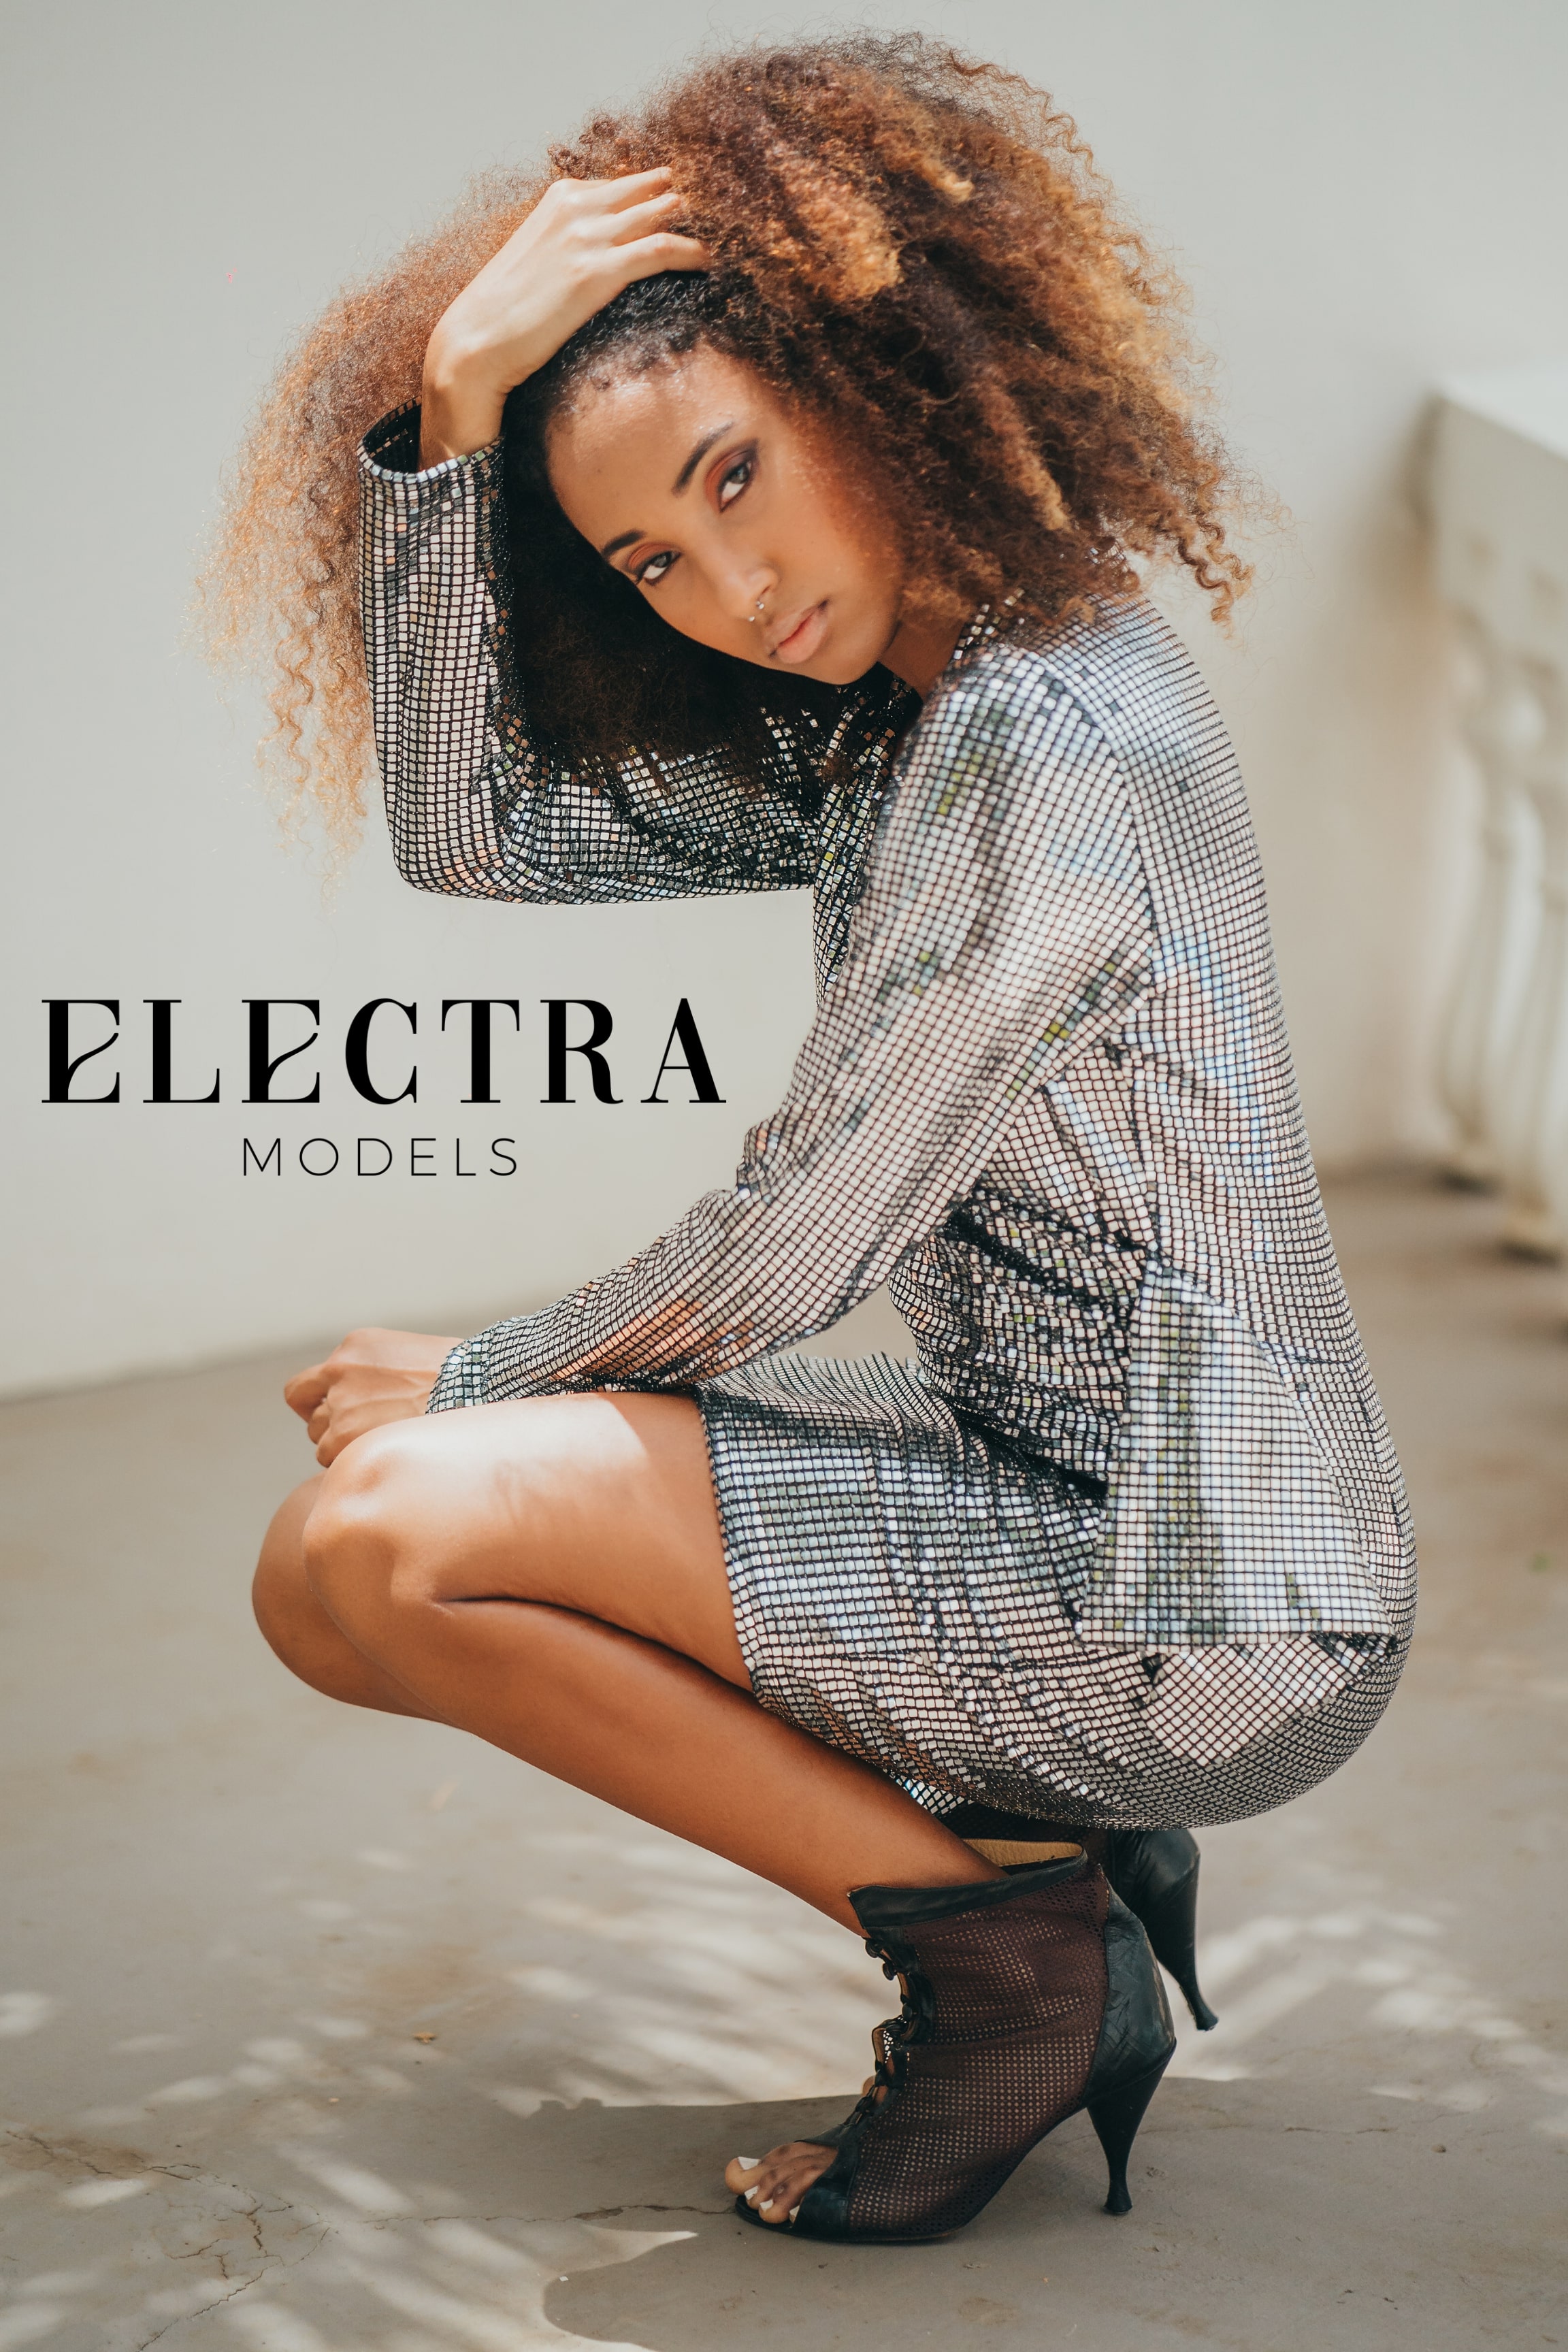 <span  class="uc_style_uc_tiles_grid_image_elementor_uc_items_attribute_title" style="color:#ffffff;">machella-electra-models</span>